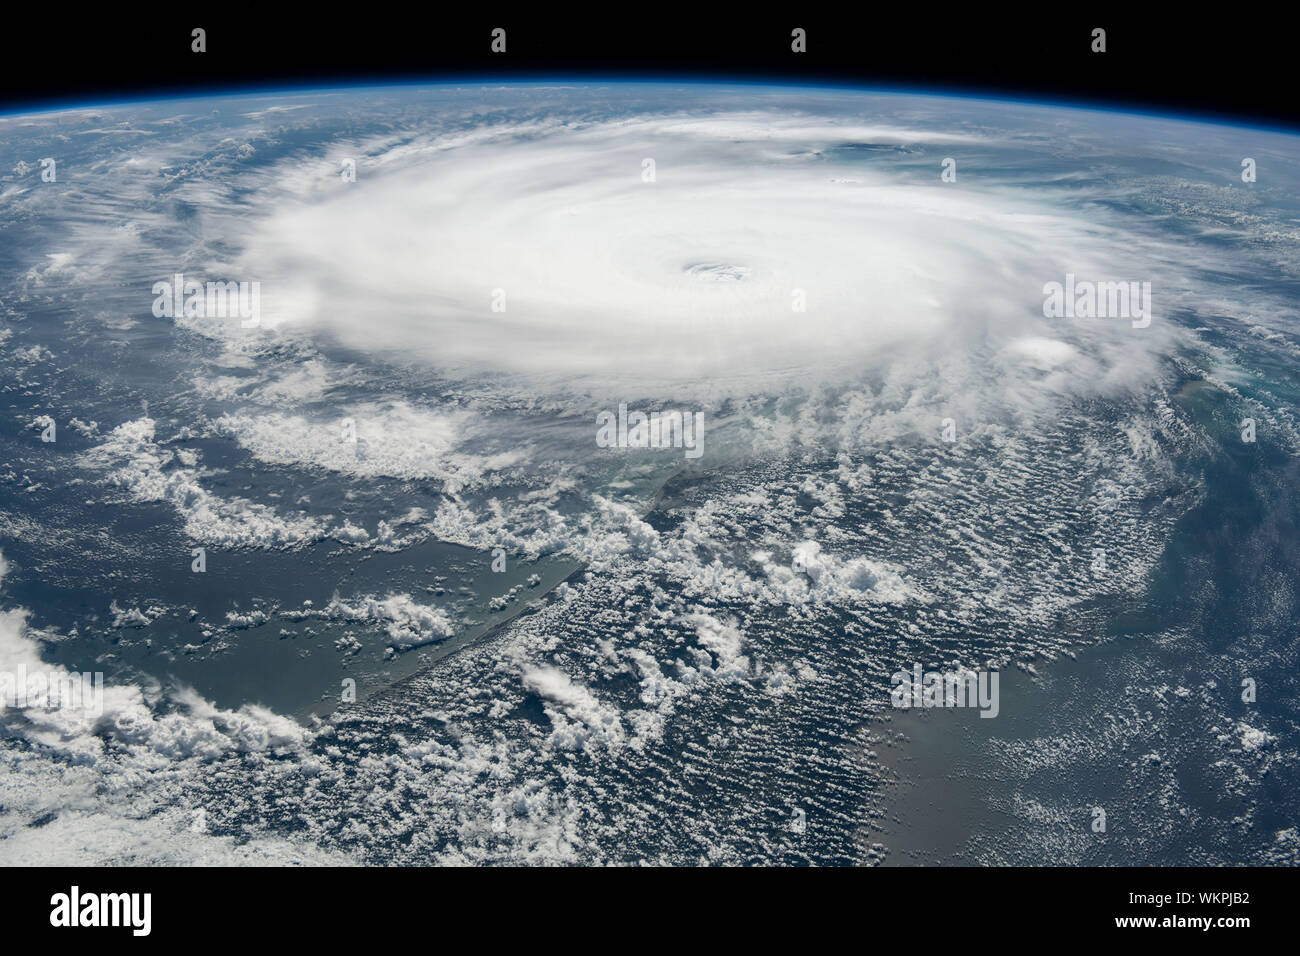 International Space Station. 02 September, 2019. Cyclonic clouds of Hurricane Dorian seen from the International Space Station as it moves toward the coast of Florida September 2, 2019 in the Atlantic Ocean. The current forecast calls for Dorian to strengthen over open water to a Category 4 with winds of 140 mph before making landfall in South Florida late Monday.  Credit: NASA/Planetpix/Alamy Live News Stock Photo